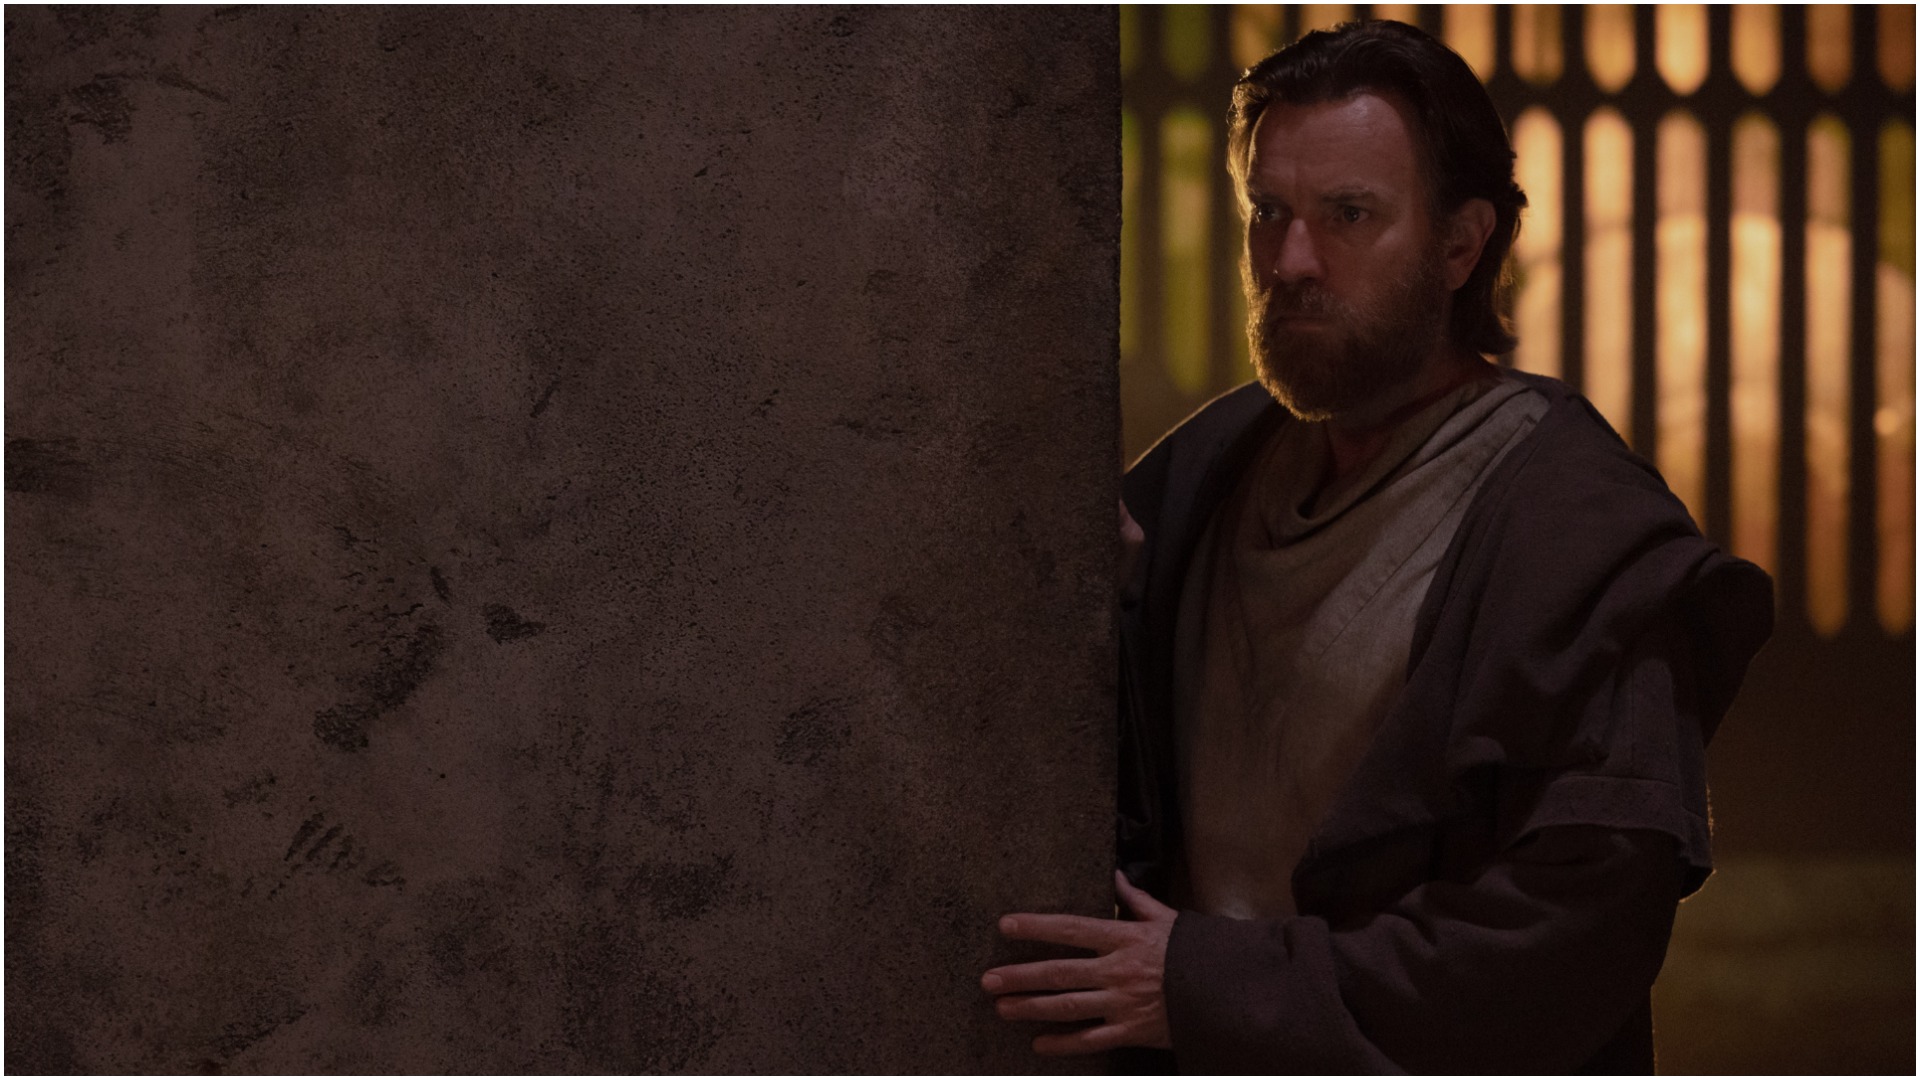 When does the Obi-Wan Kenobi series take place in the Star Wars timeline?